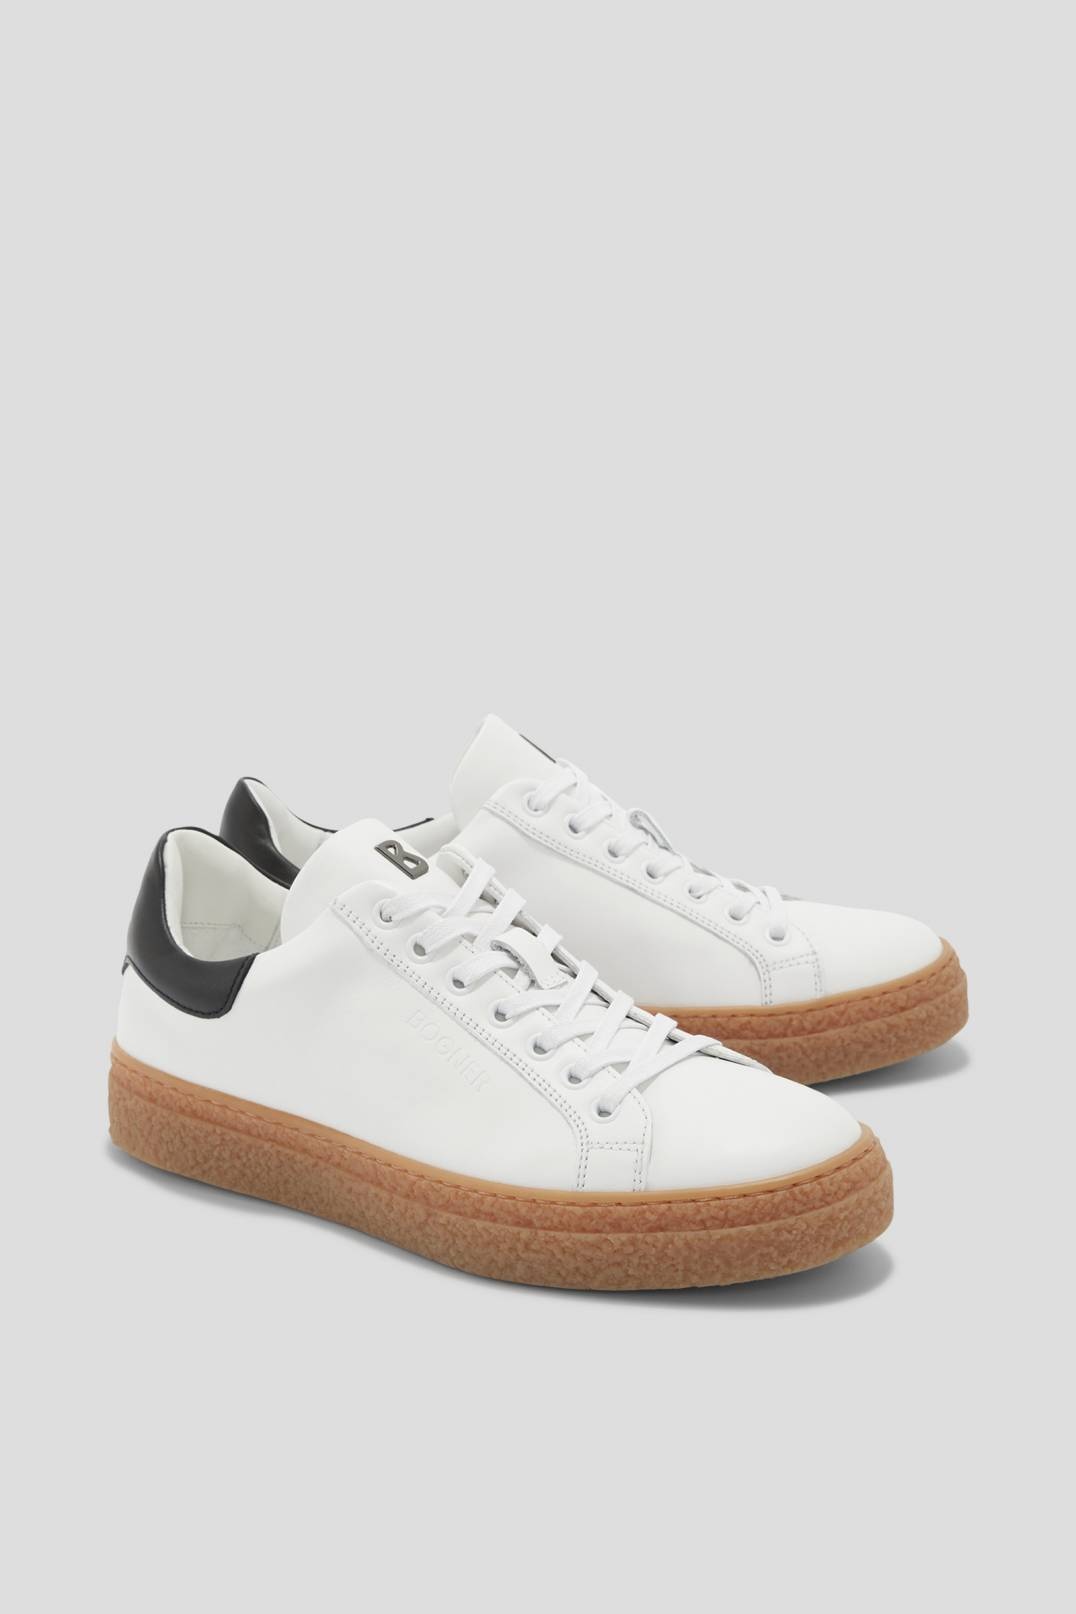 CLEVELAND SNEAKERS IN WHITE/BROWN - 3